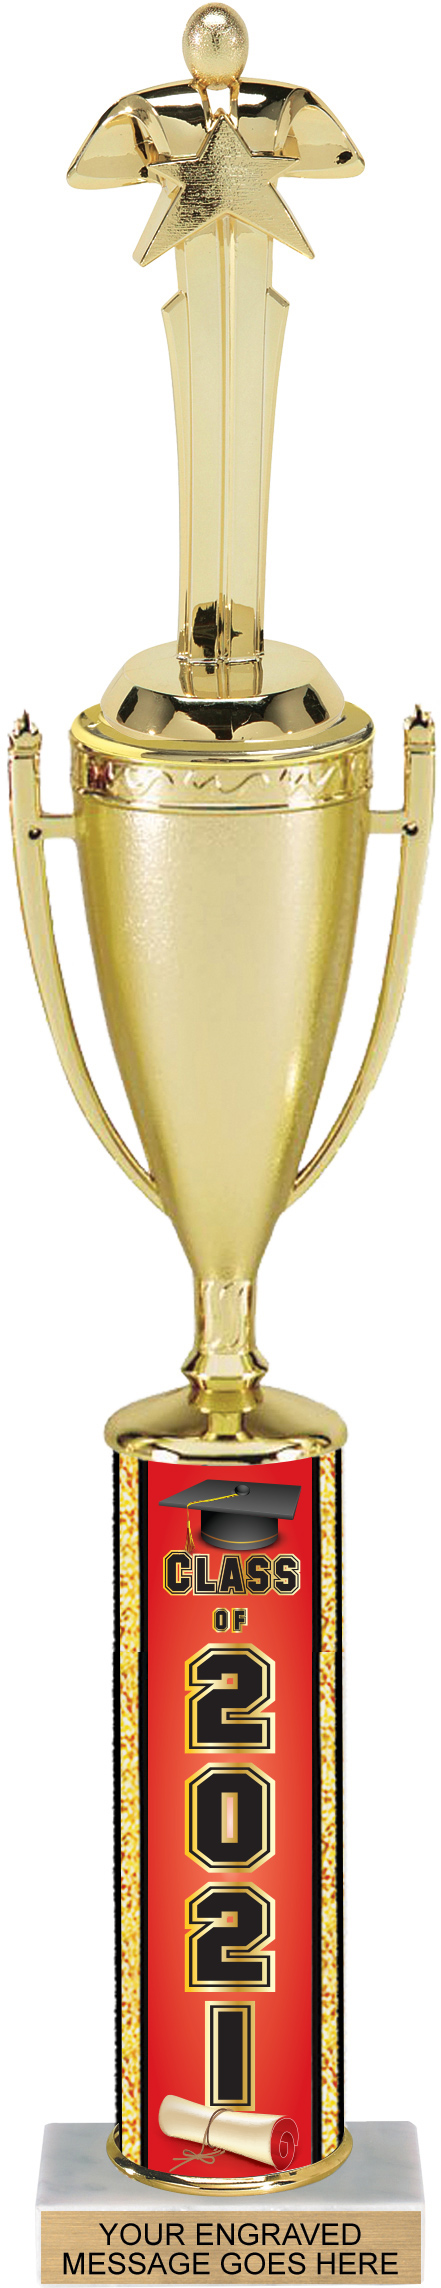 Class of 2021 Cup Trophy - 17 inch